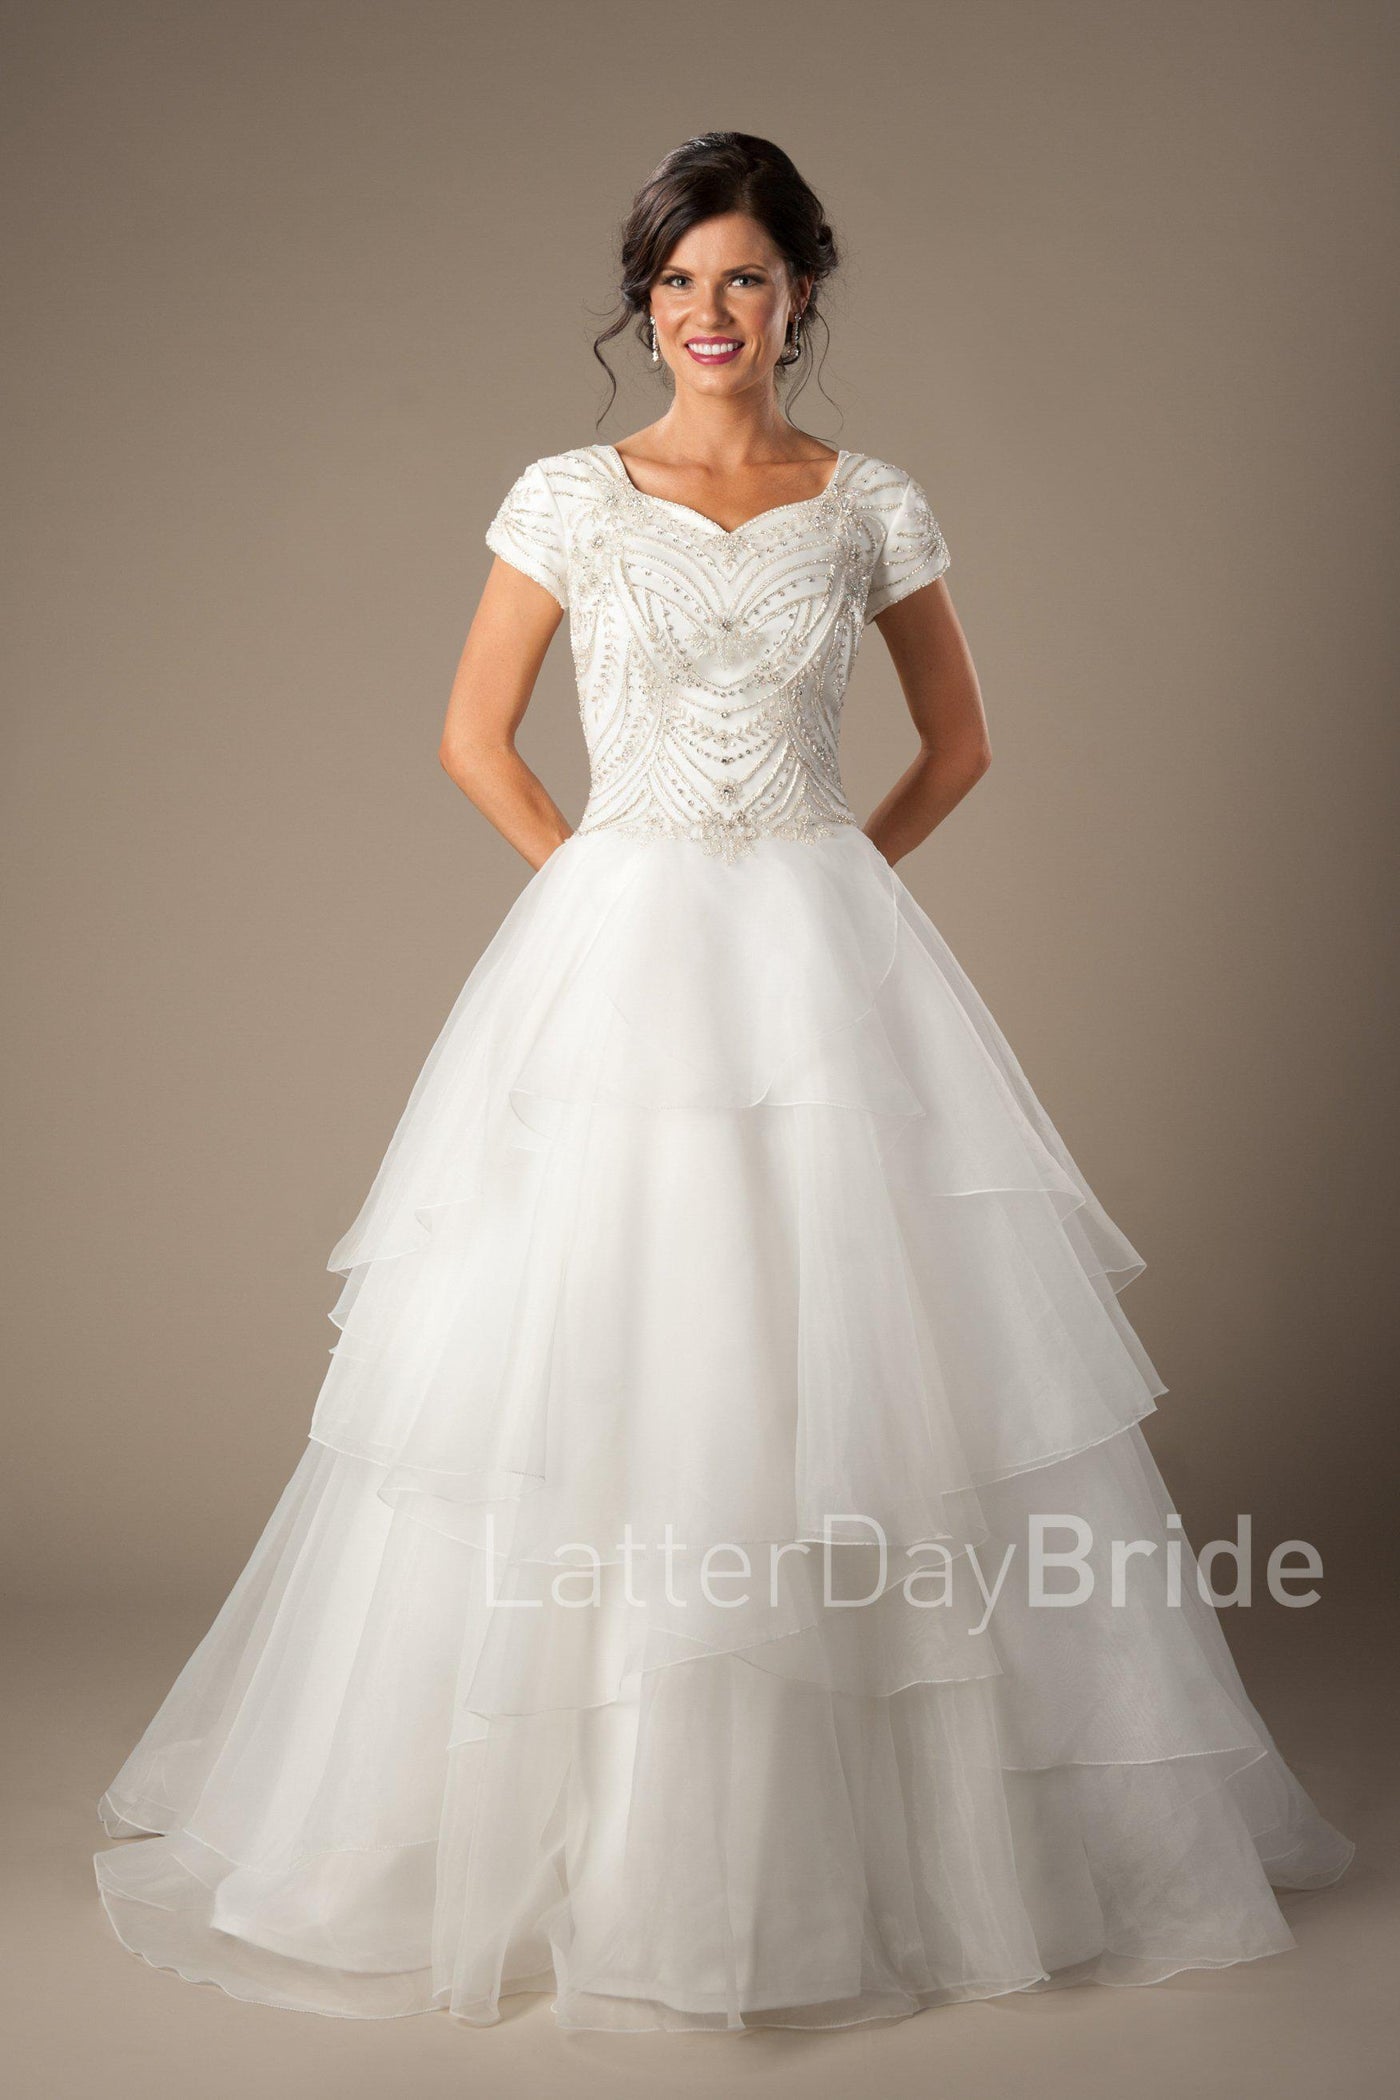 Elaborate beadwork and flowing tiered modest wedding dress, style Weismann, is part of the Wedding Collection of LatterDayBride, a Utah Wedding Shop. 